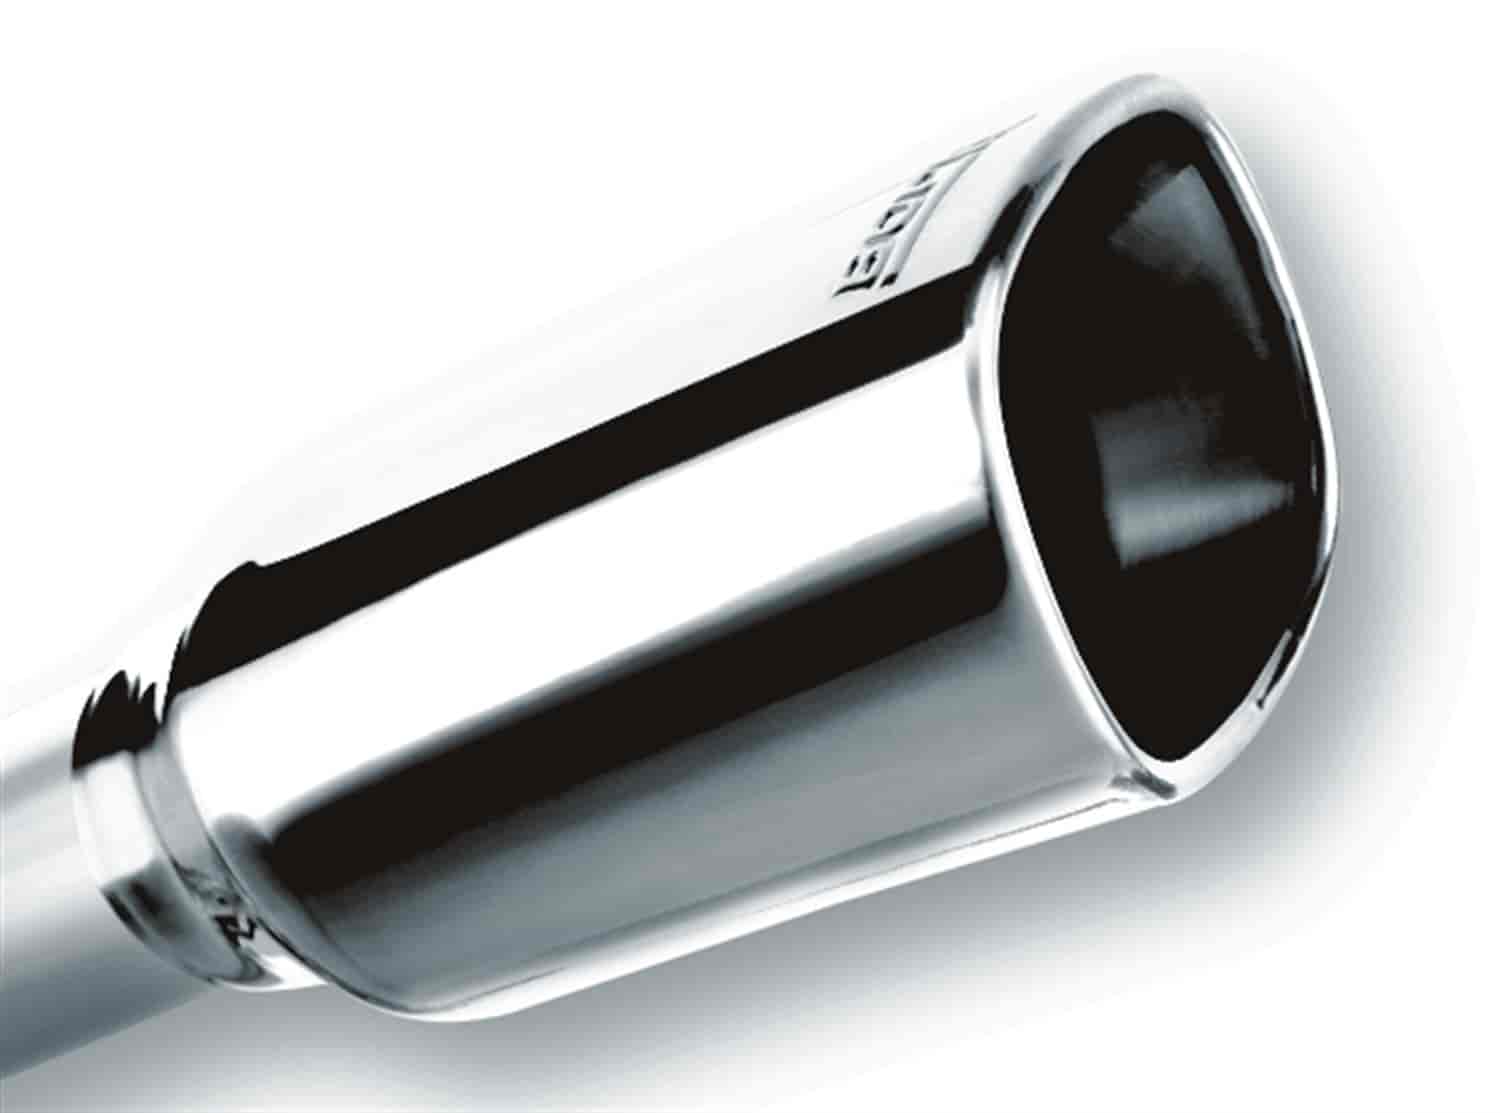 Stainless Steel Exhaust Tip Outlet Size: 3.28" x 3.5"